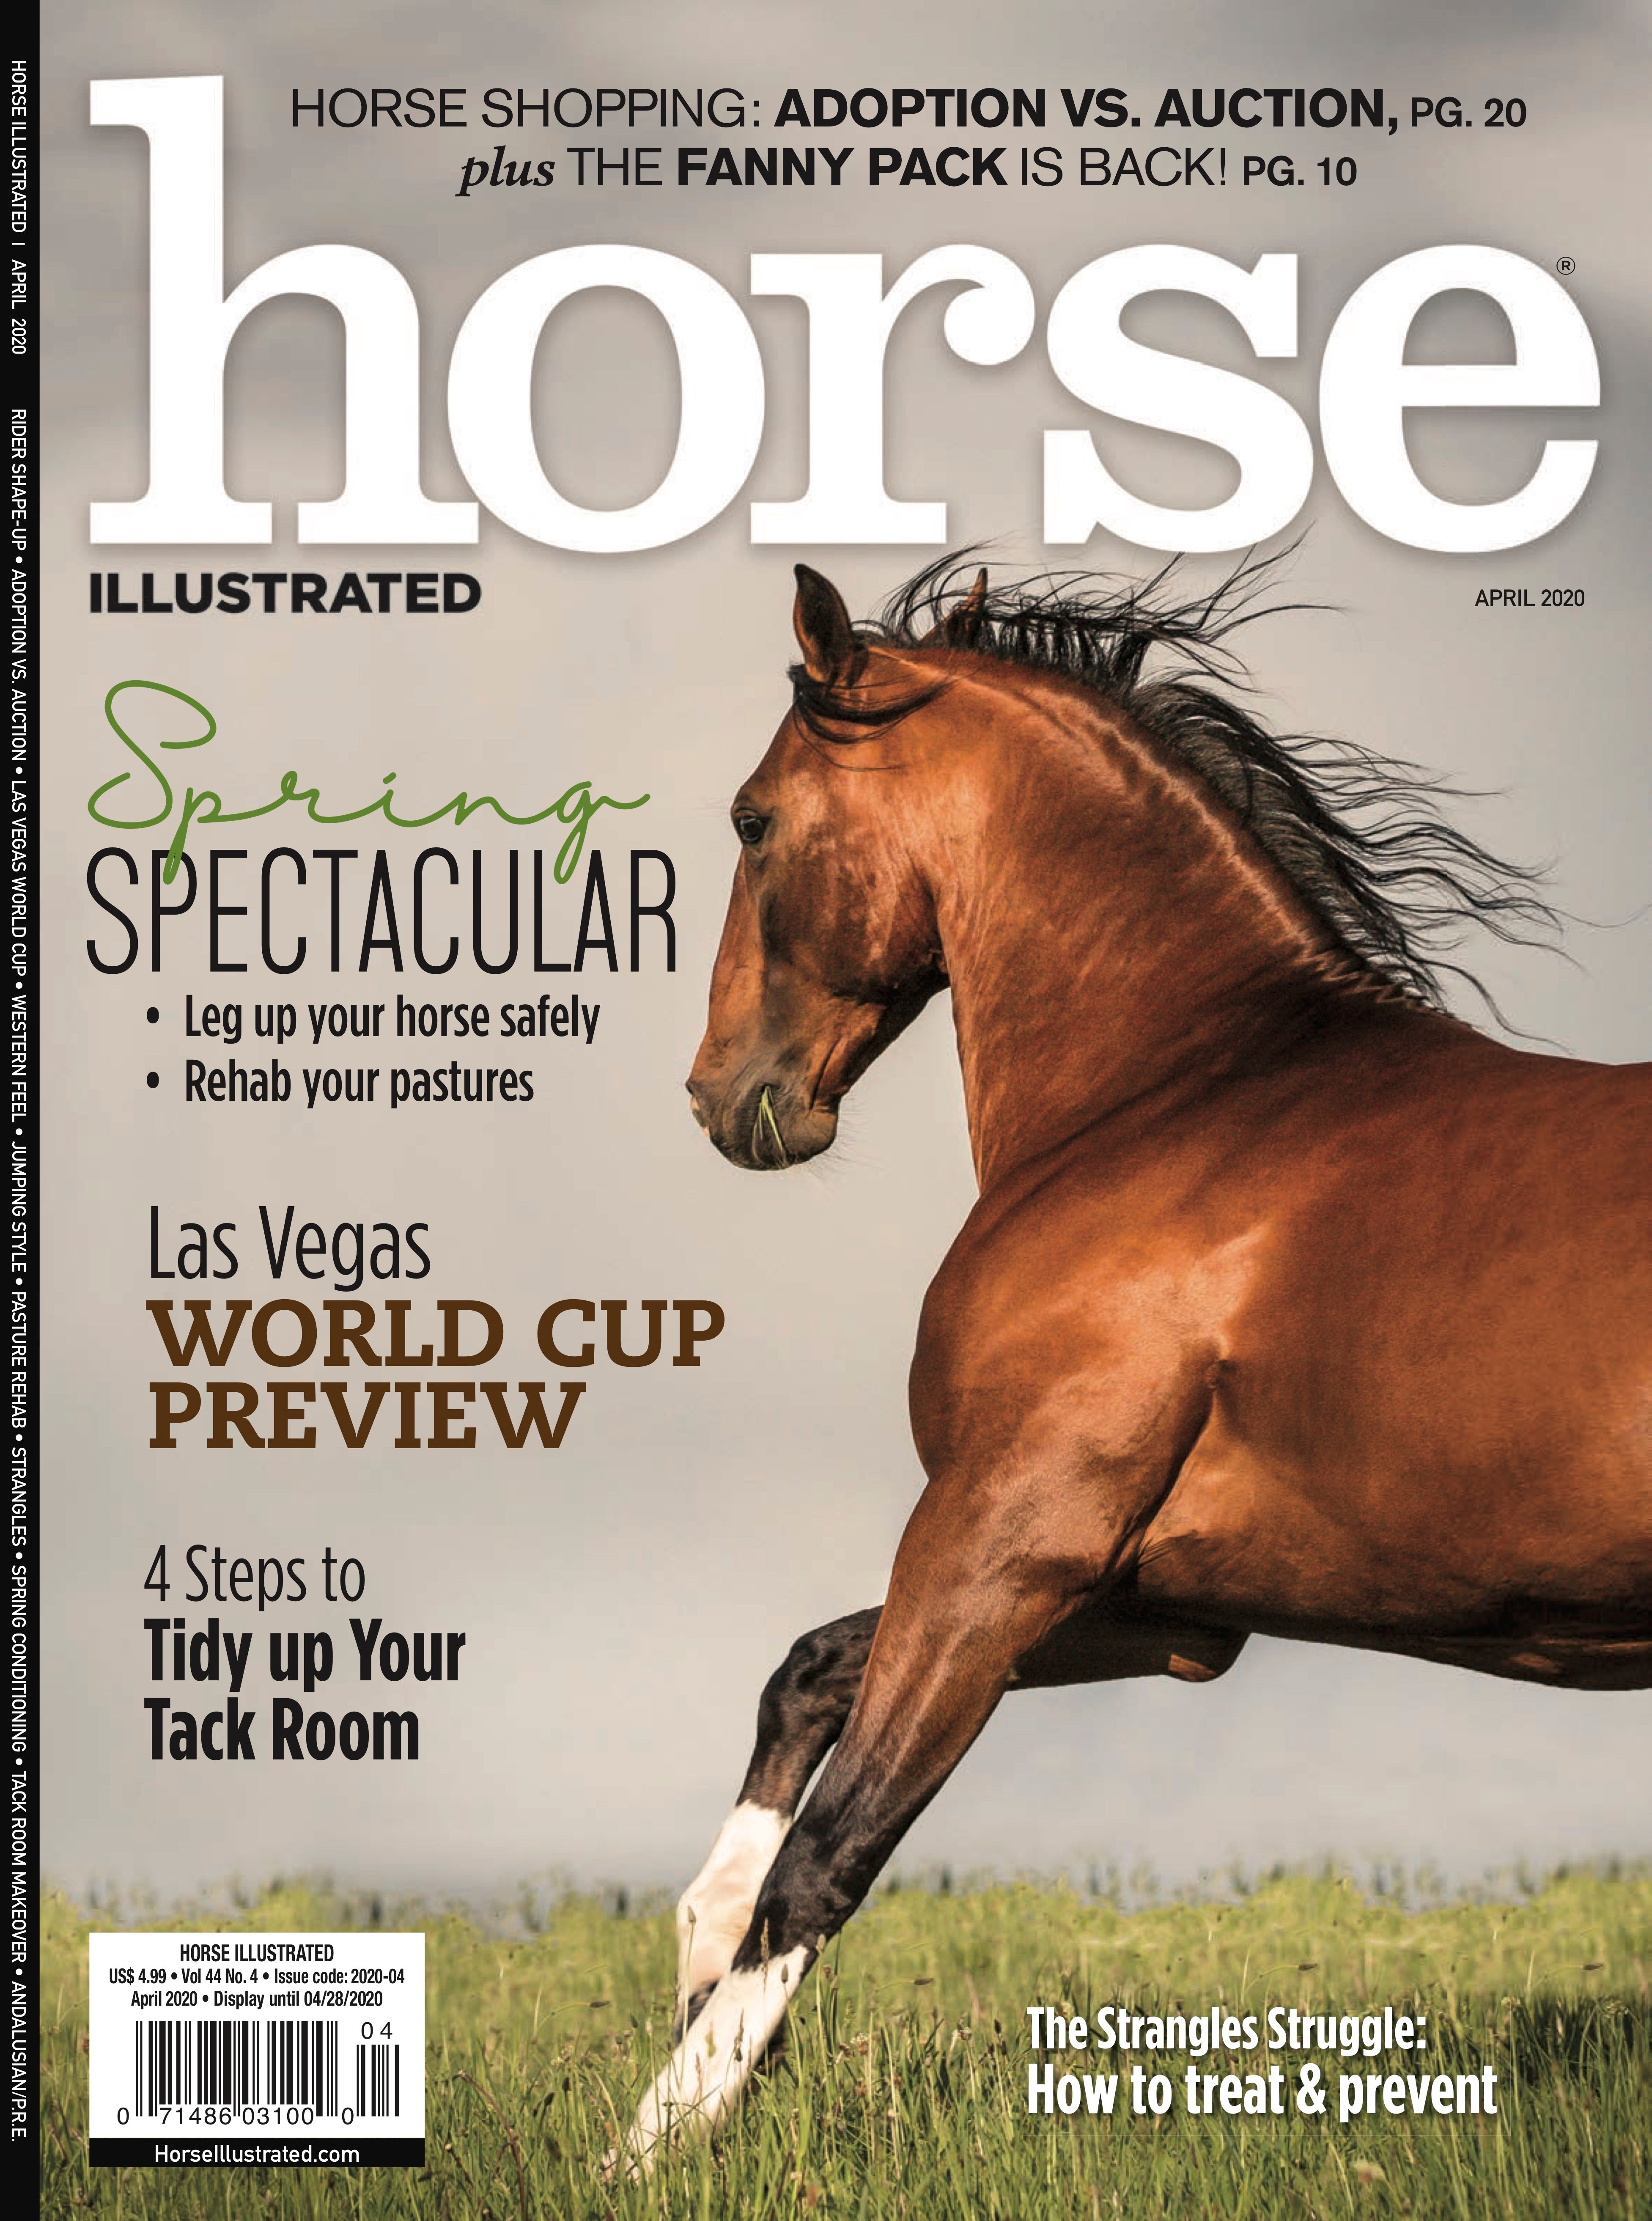 Spring Feature at: HORSE ILLUSTRATED